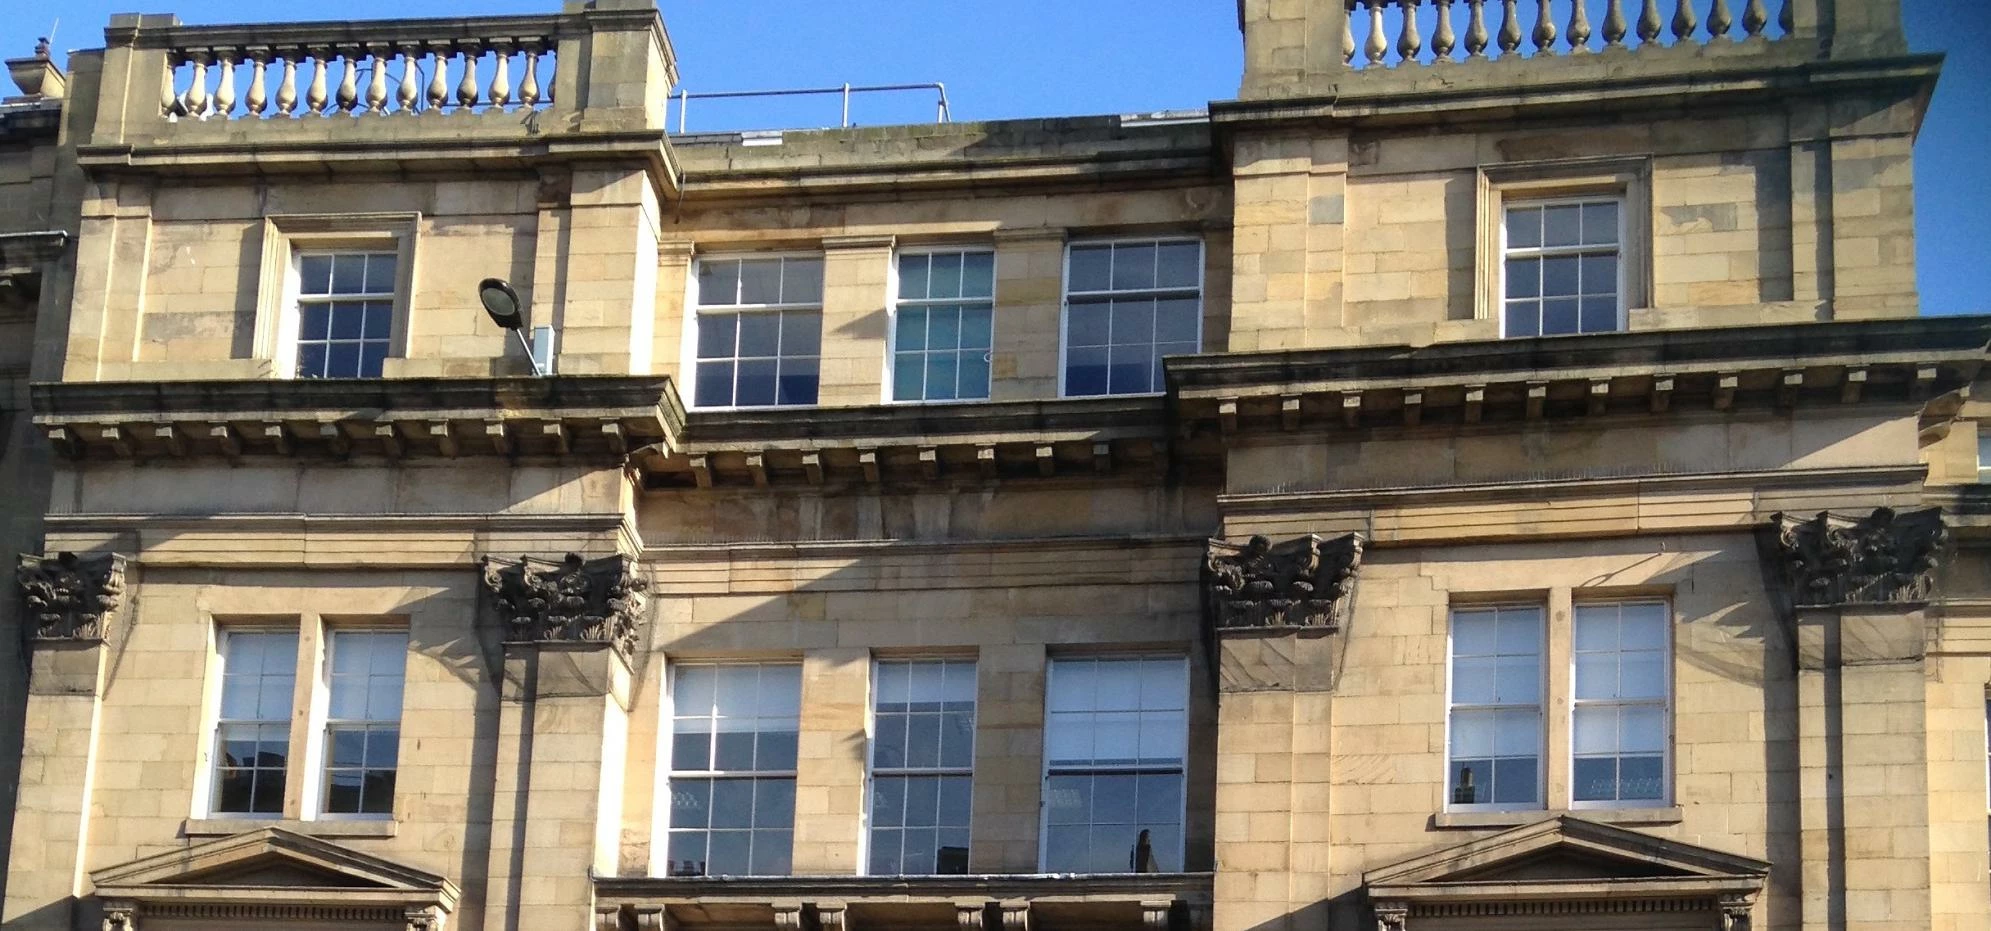 The upper floors of Gainsborough House on Grey Street.